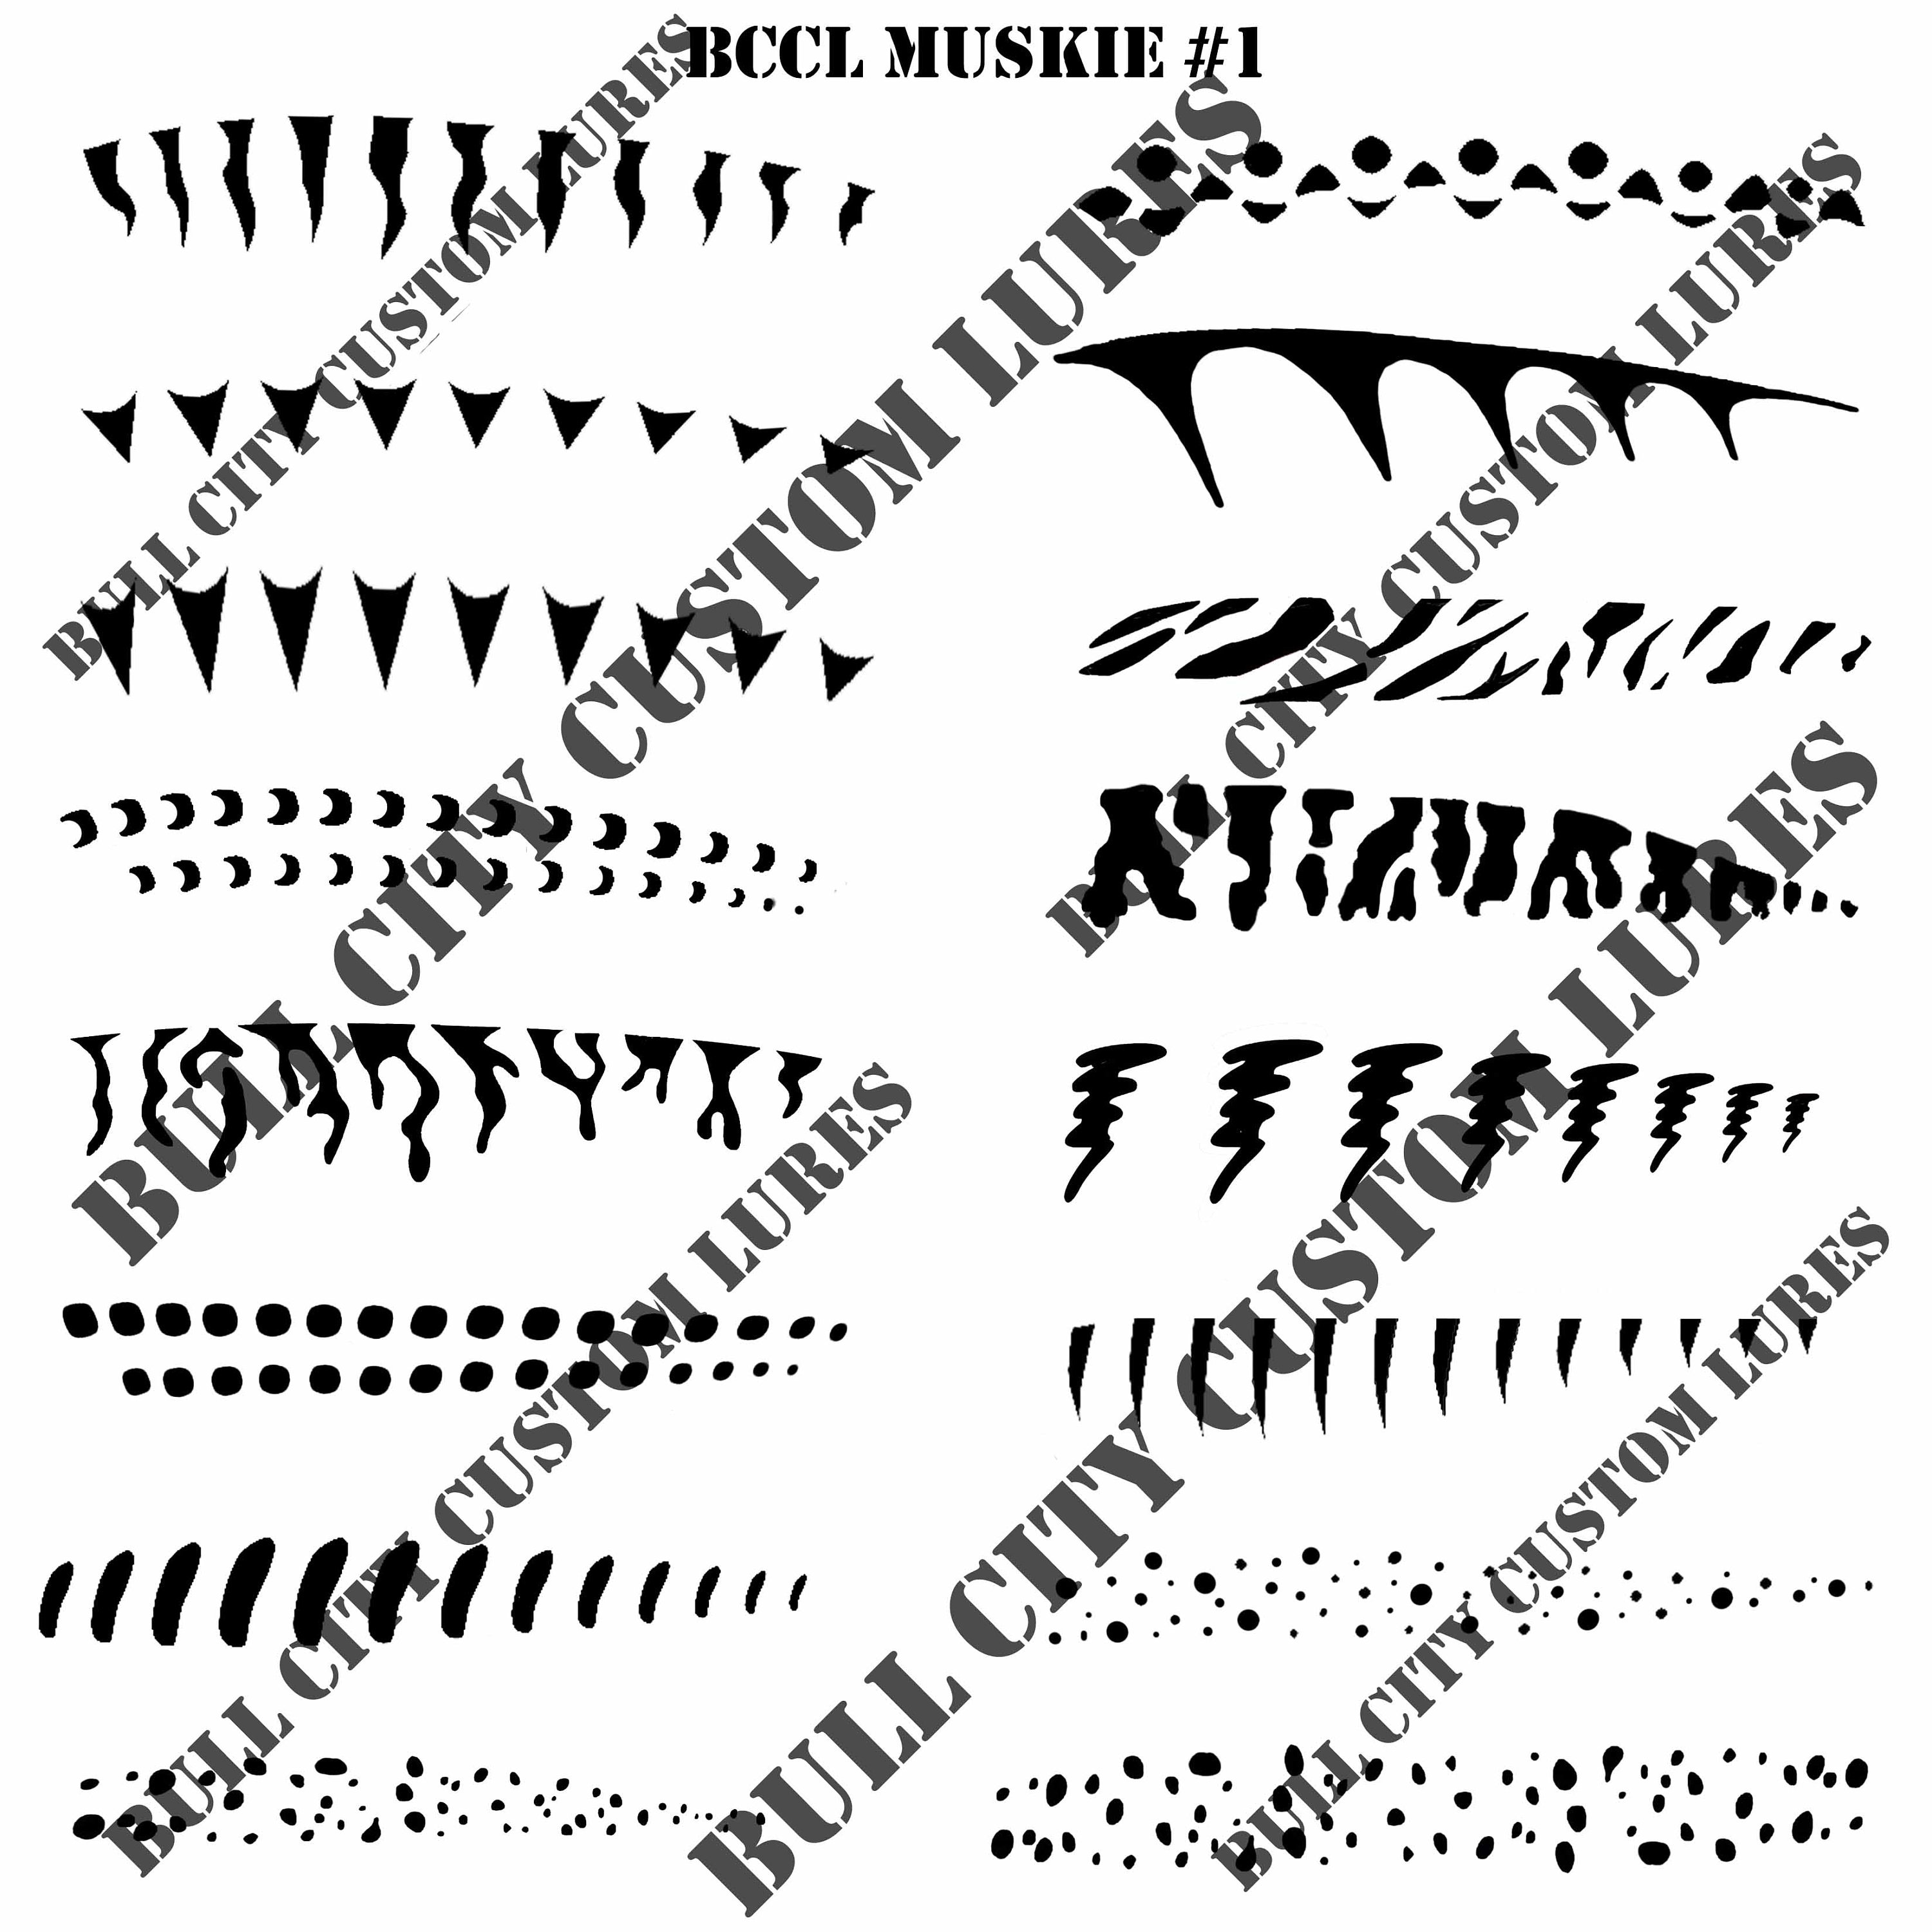 Buy BCCL Muskie Stencil 1 Crankbait Jerkbait Topwater Bass Fishing Painting  Scales Patterns Dots Circles Hexagon Camo Lines Stripes Air Brush Online in  India 